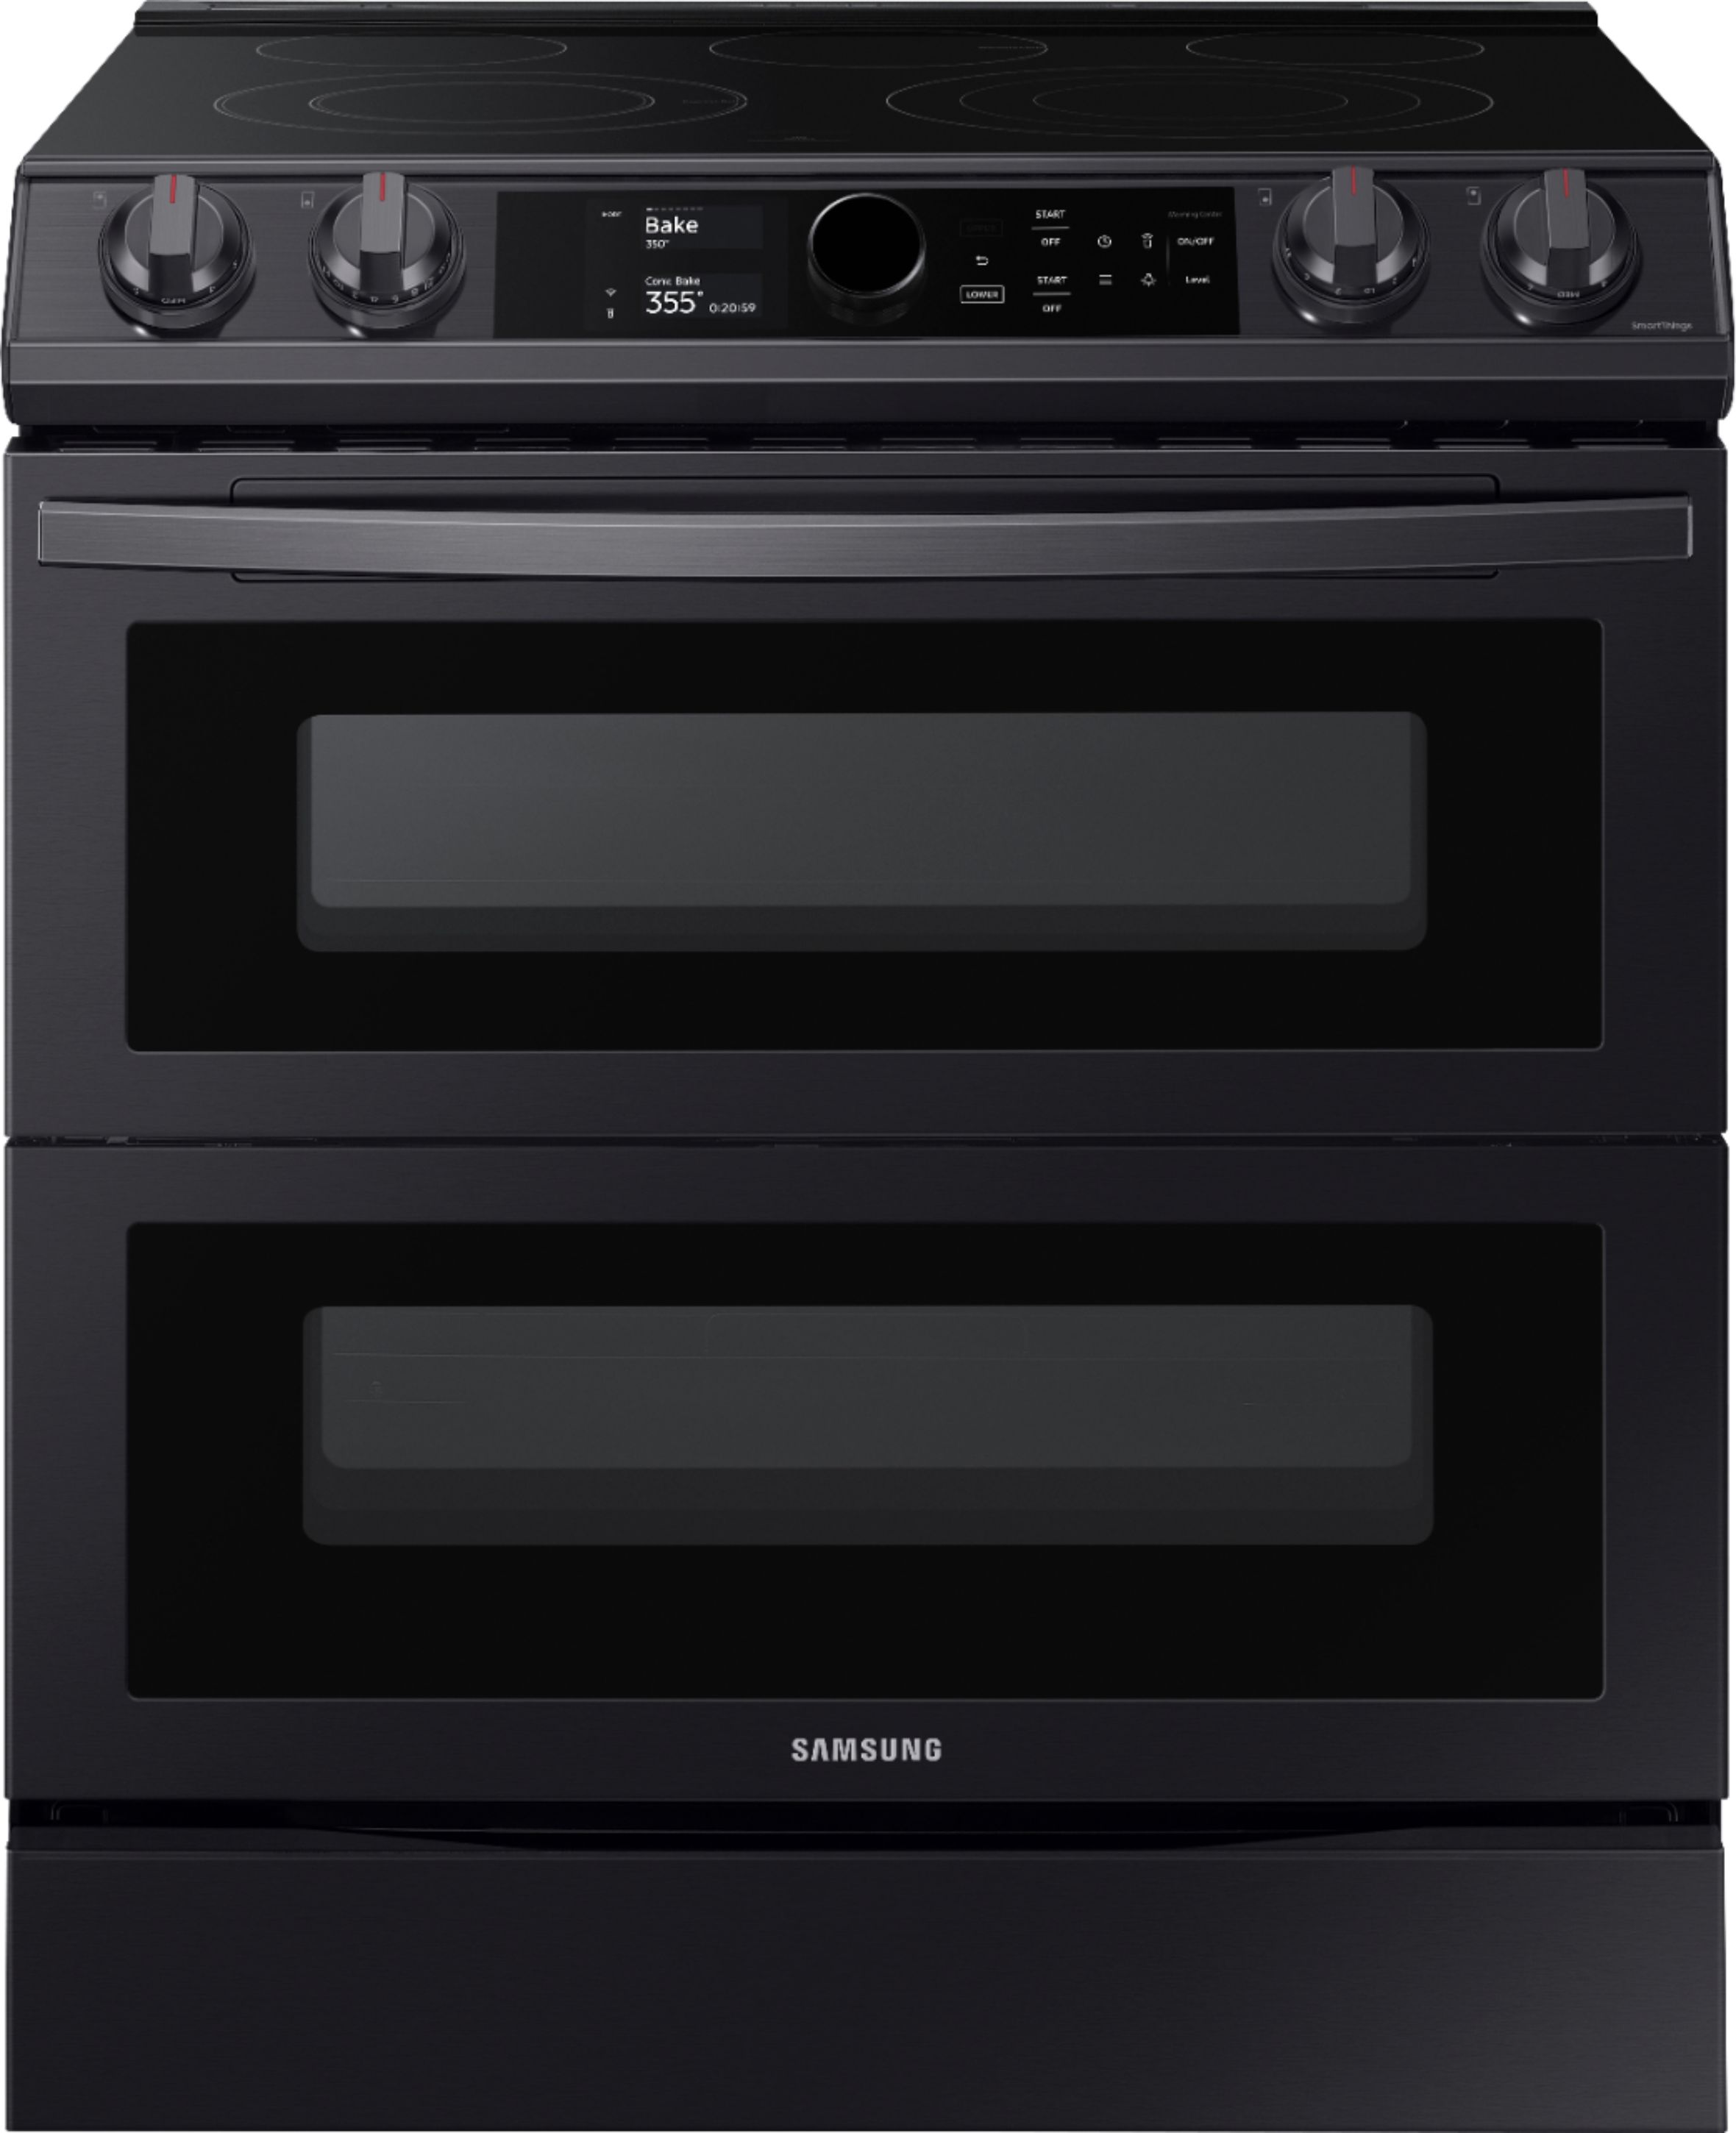 samsung-black-stainless-electric-stove-hot-deal-save-65-jlcatj-gob-mx